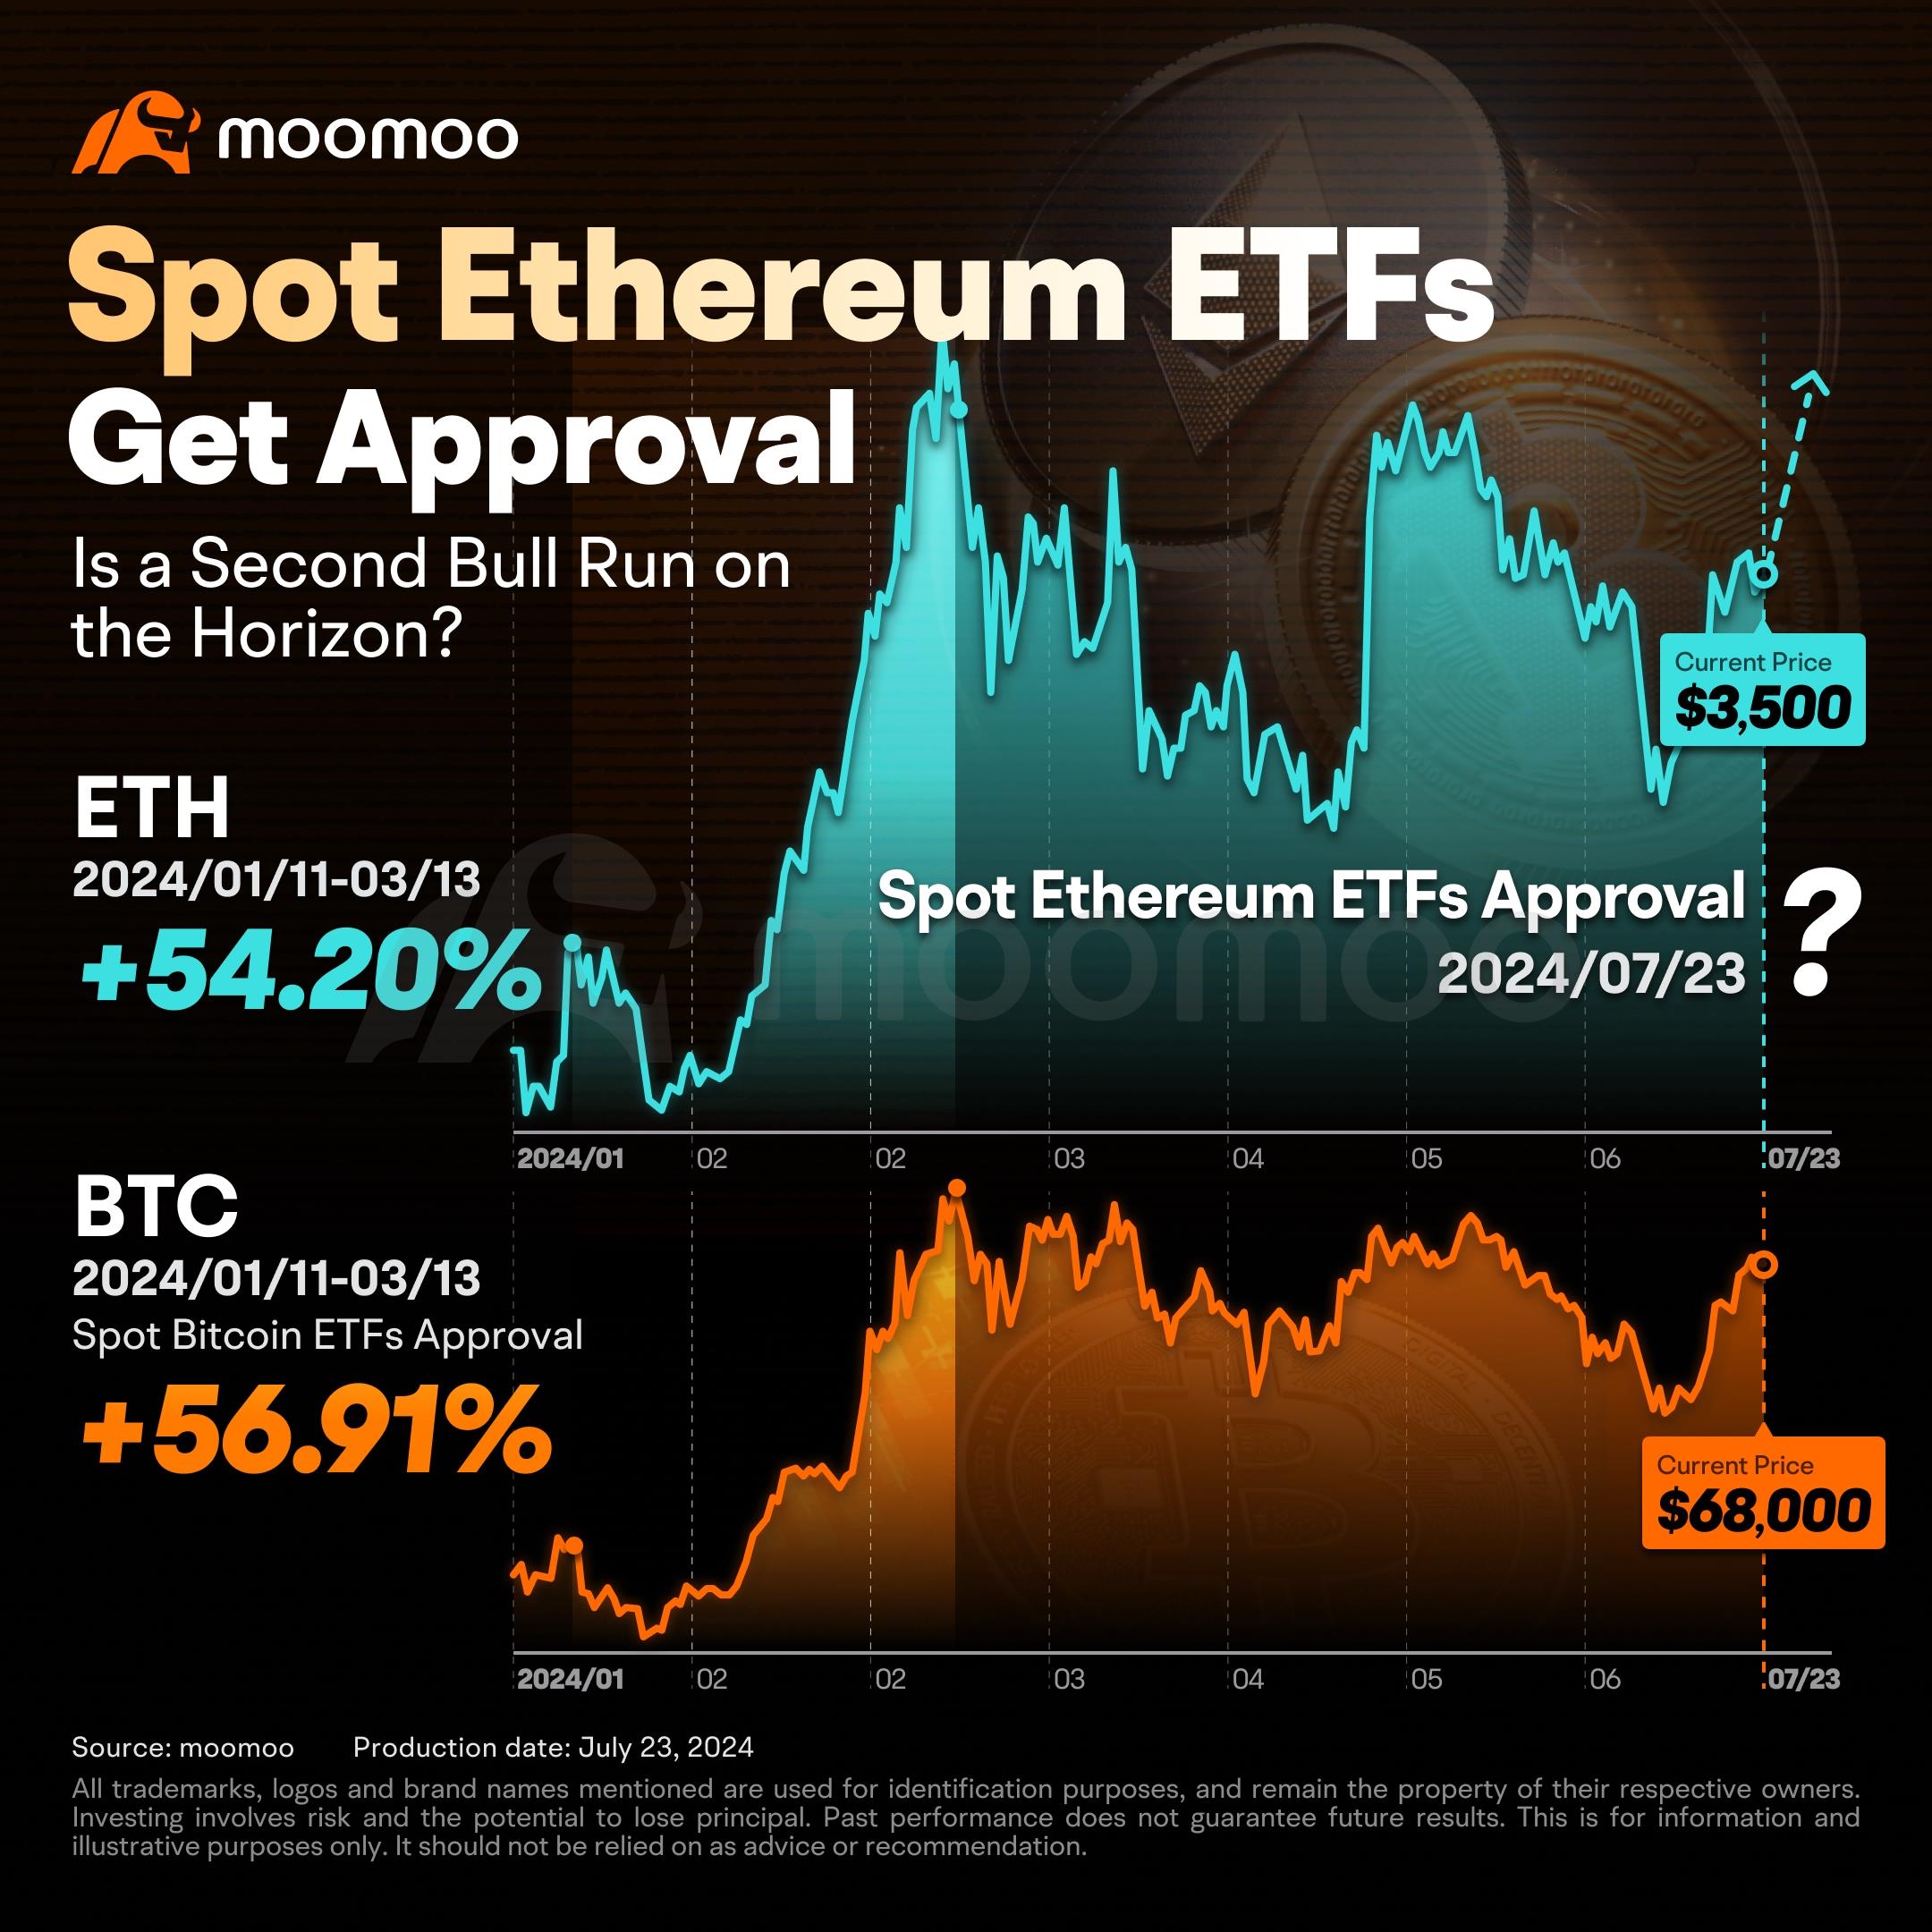 Spot Ethereum ETFs get final approval from the U.S. SEC: Is a second bull run on the horizon?